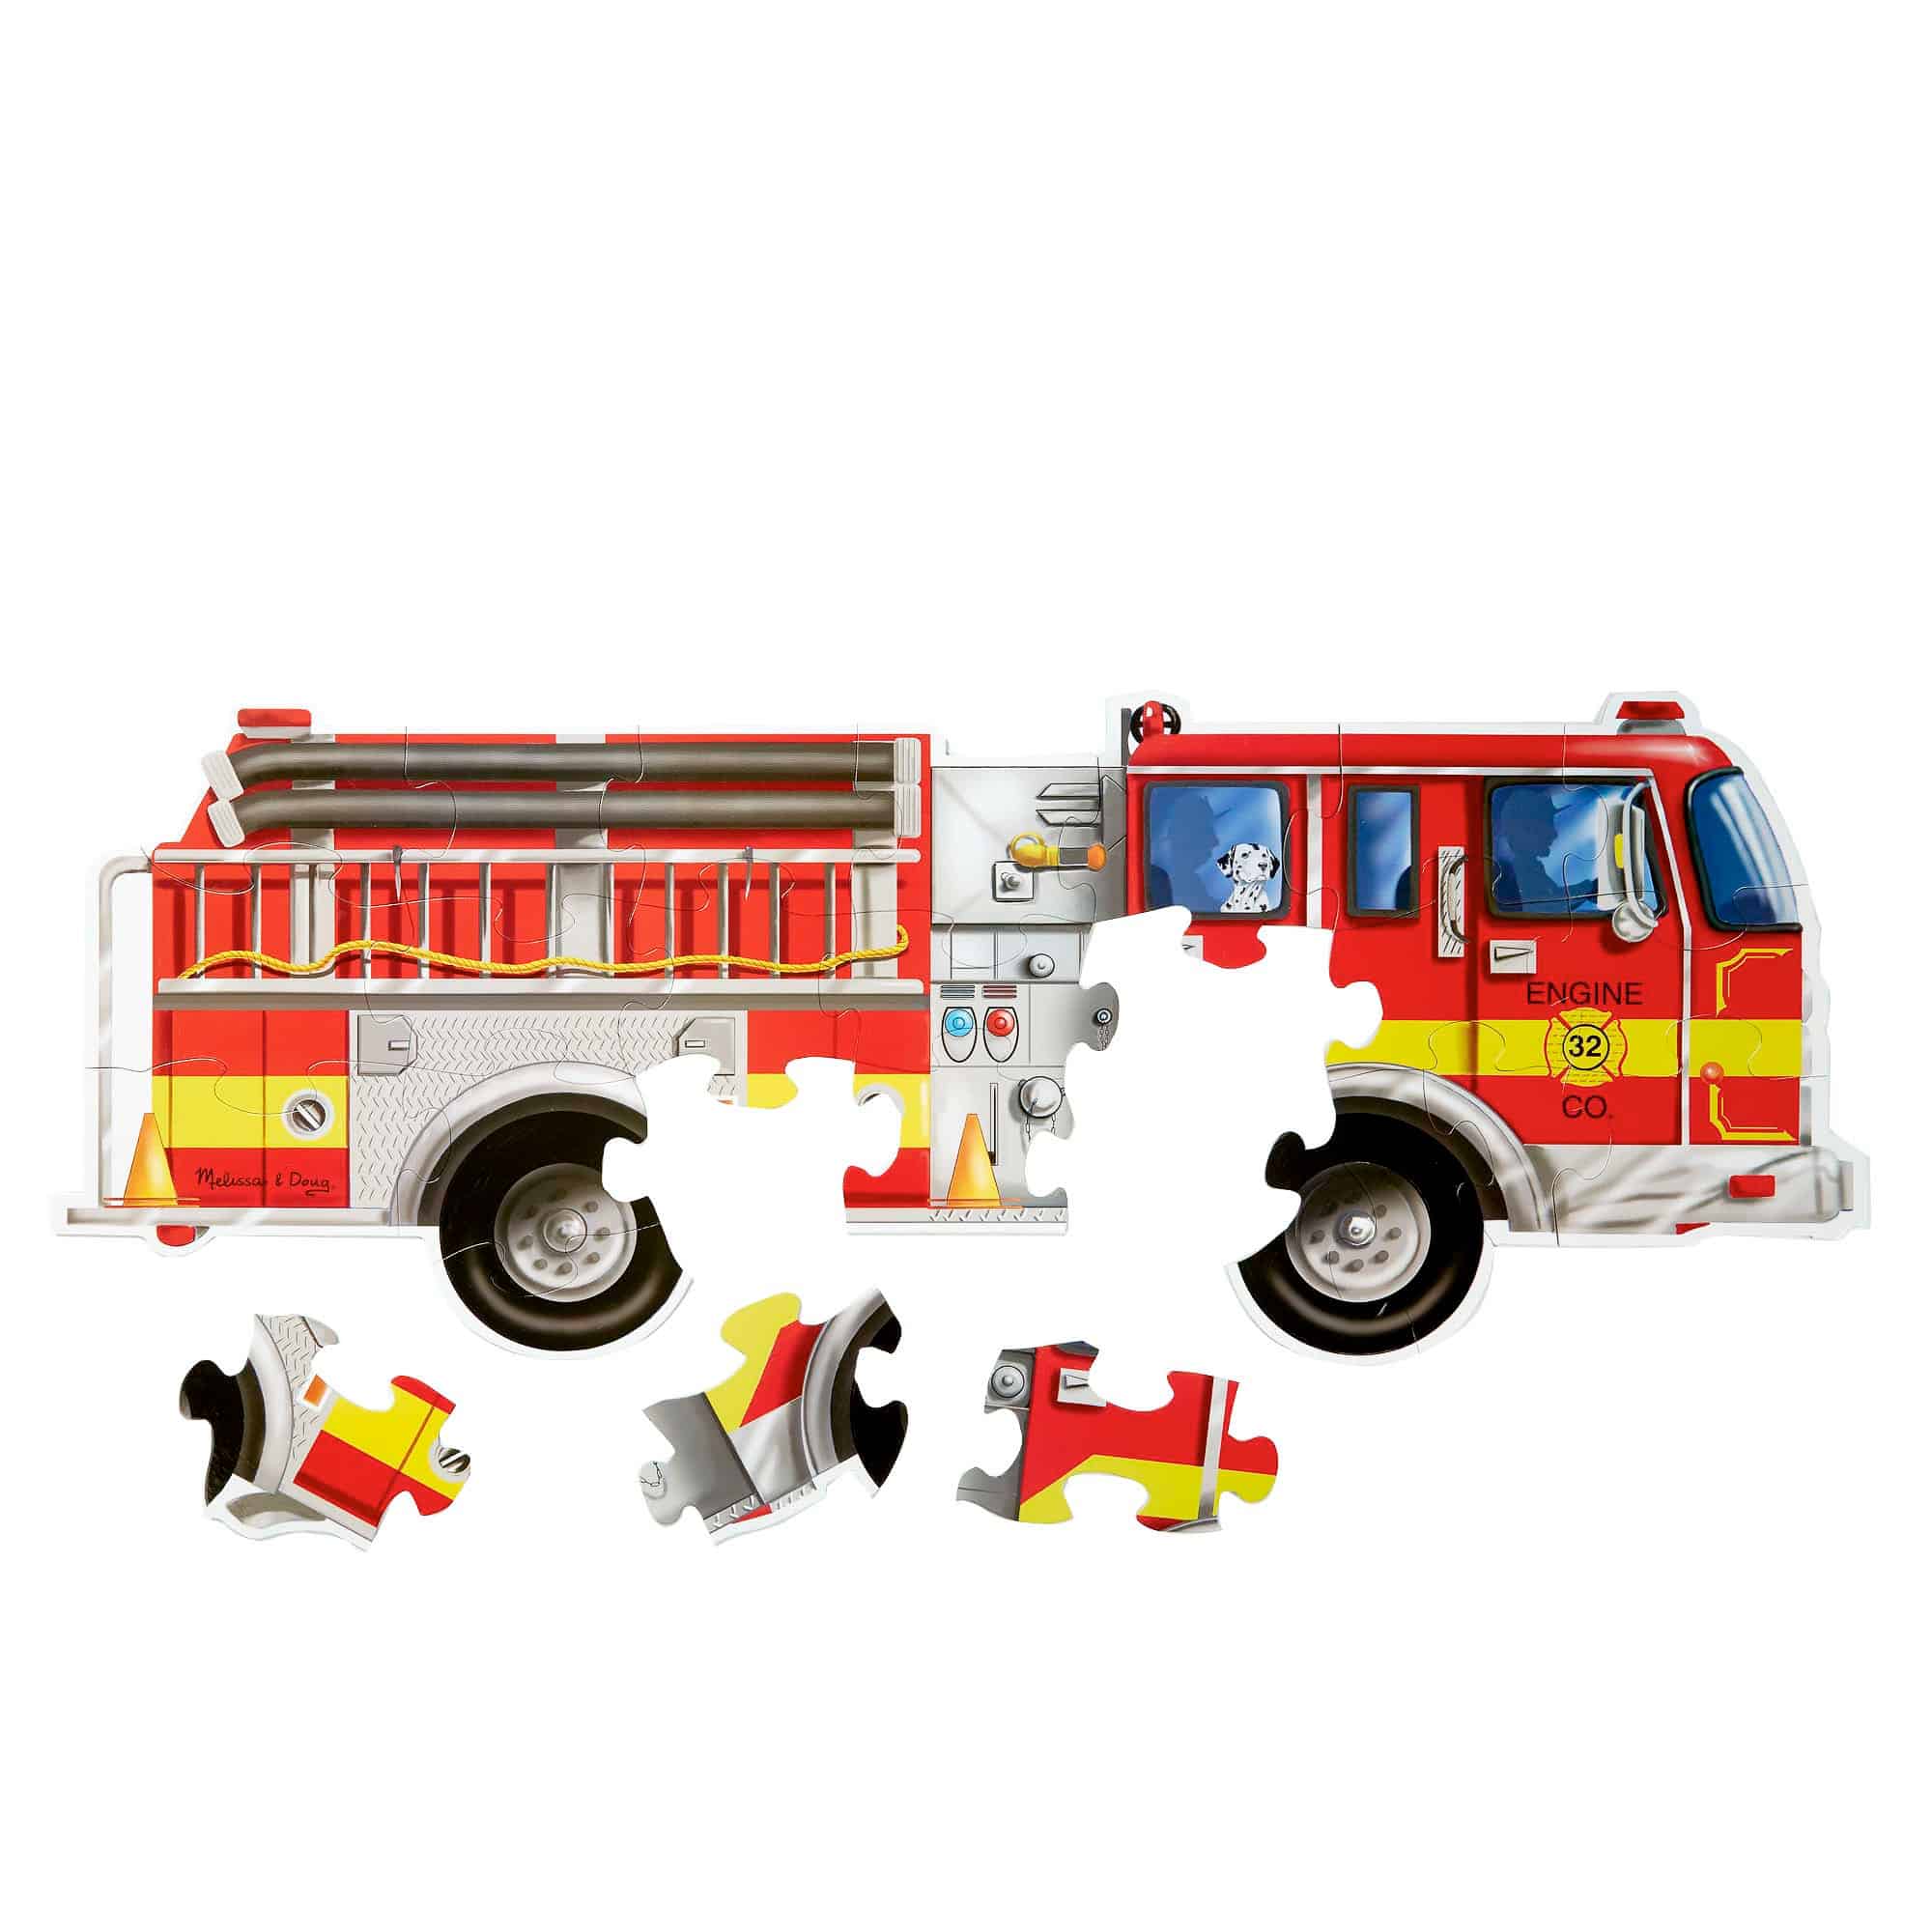 Melissa and Doug - 24 Piece Giant Floor Puzzle - Giant Fire Truck